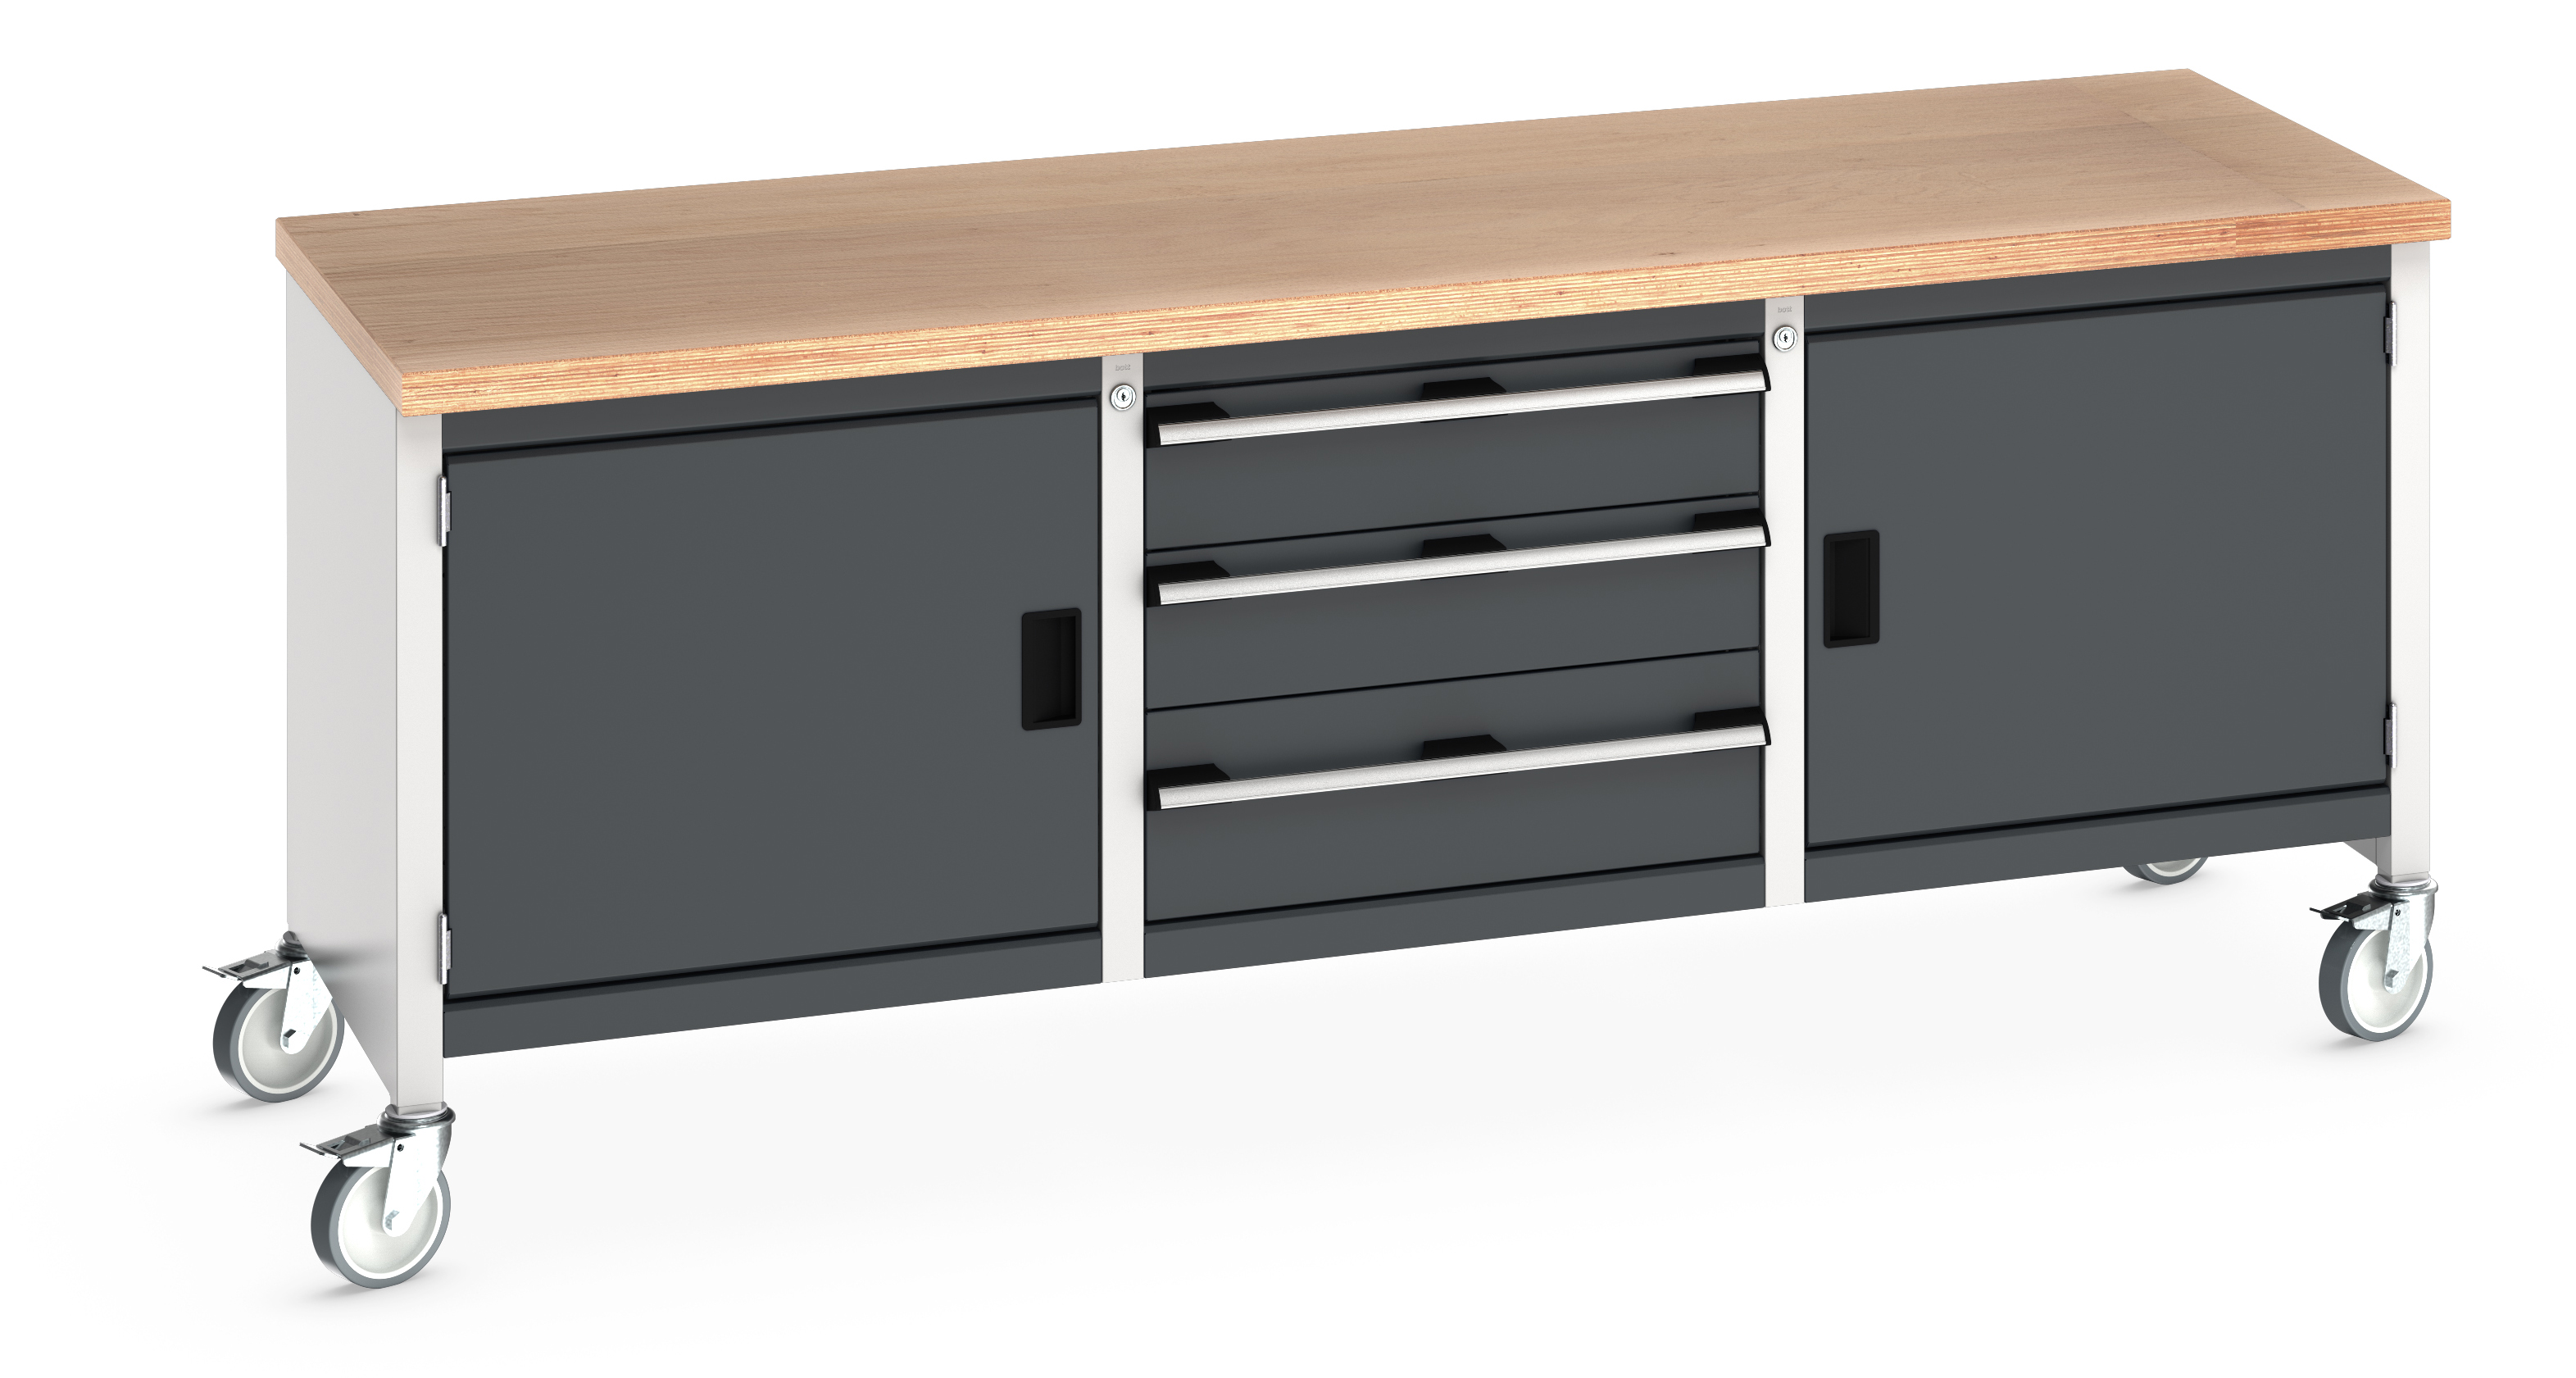 Bott Cubio Mobile Storage Bench With Full Cupboard / 3 Drawer Cabinet / Full Cupboard - 41002124.19V